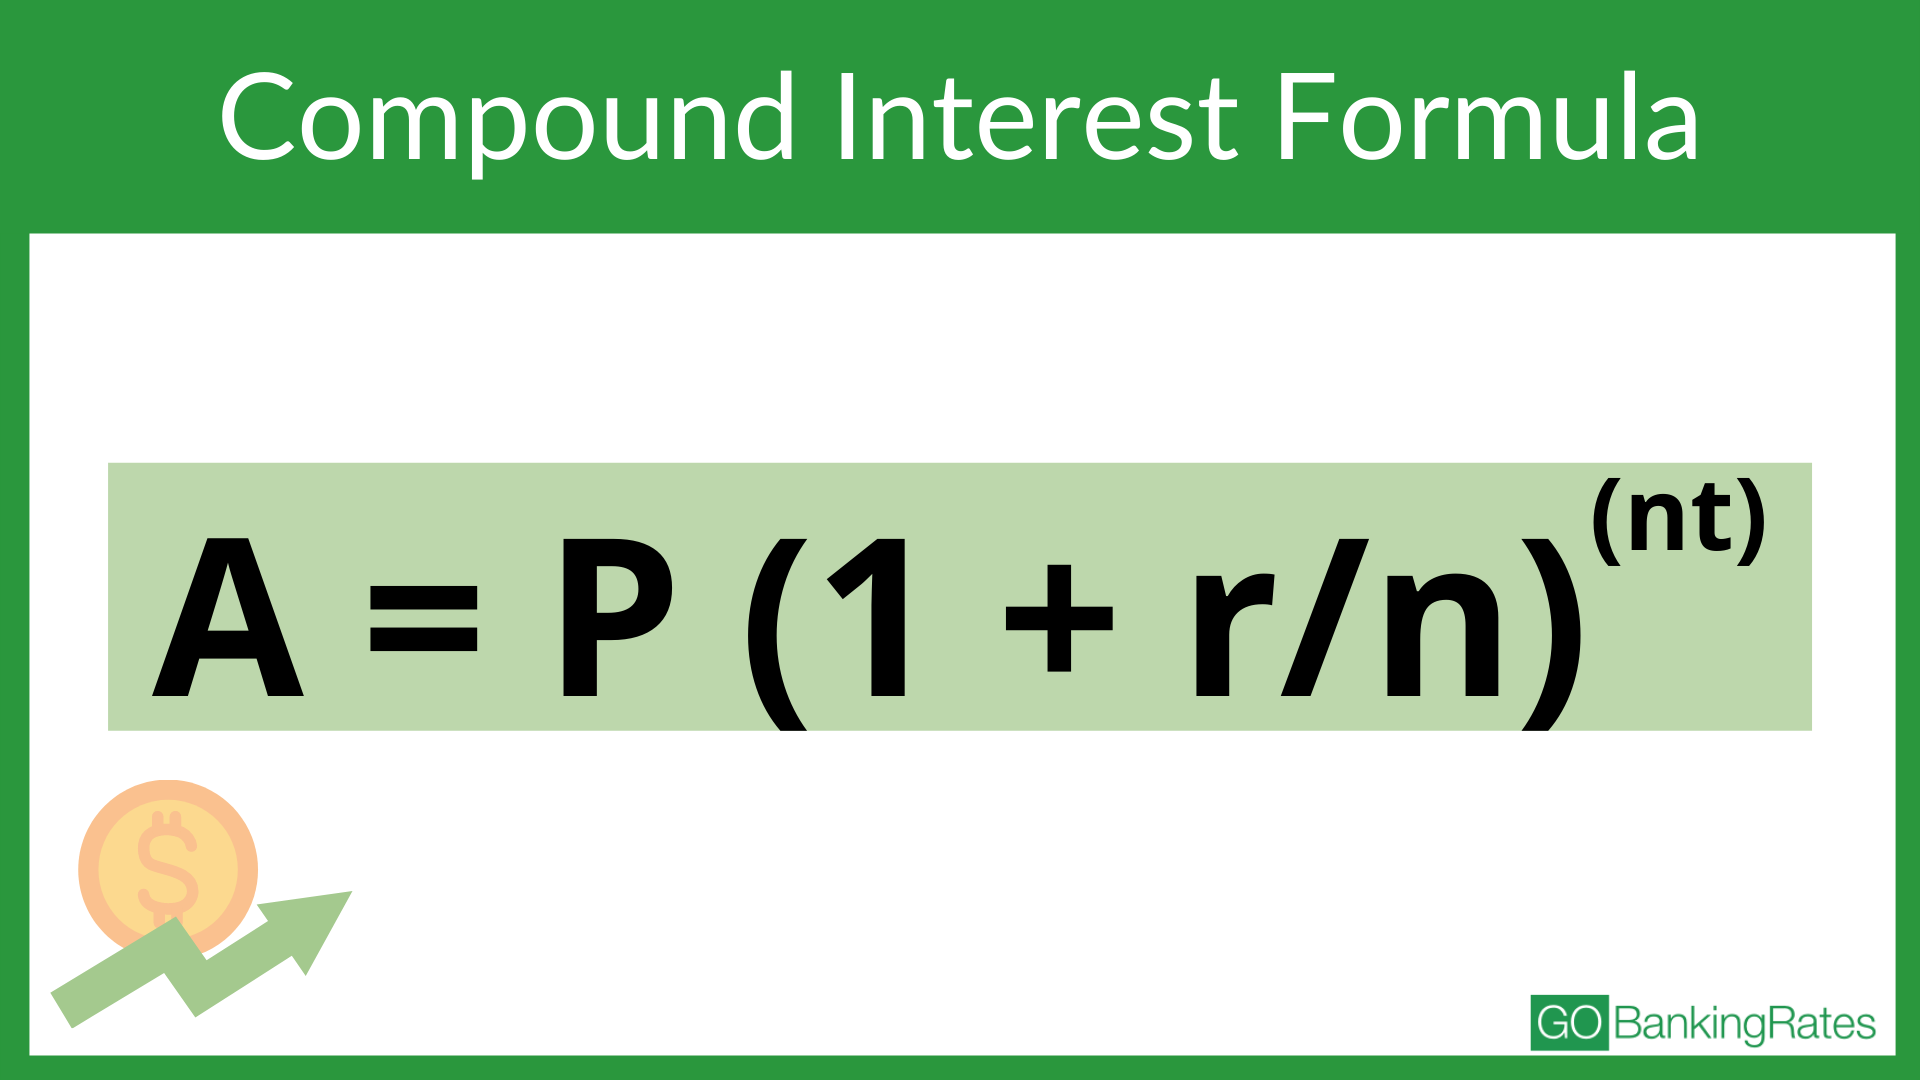 The formula for calculating compound interest is A = P (1 + r/n)(nt)